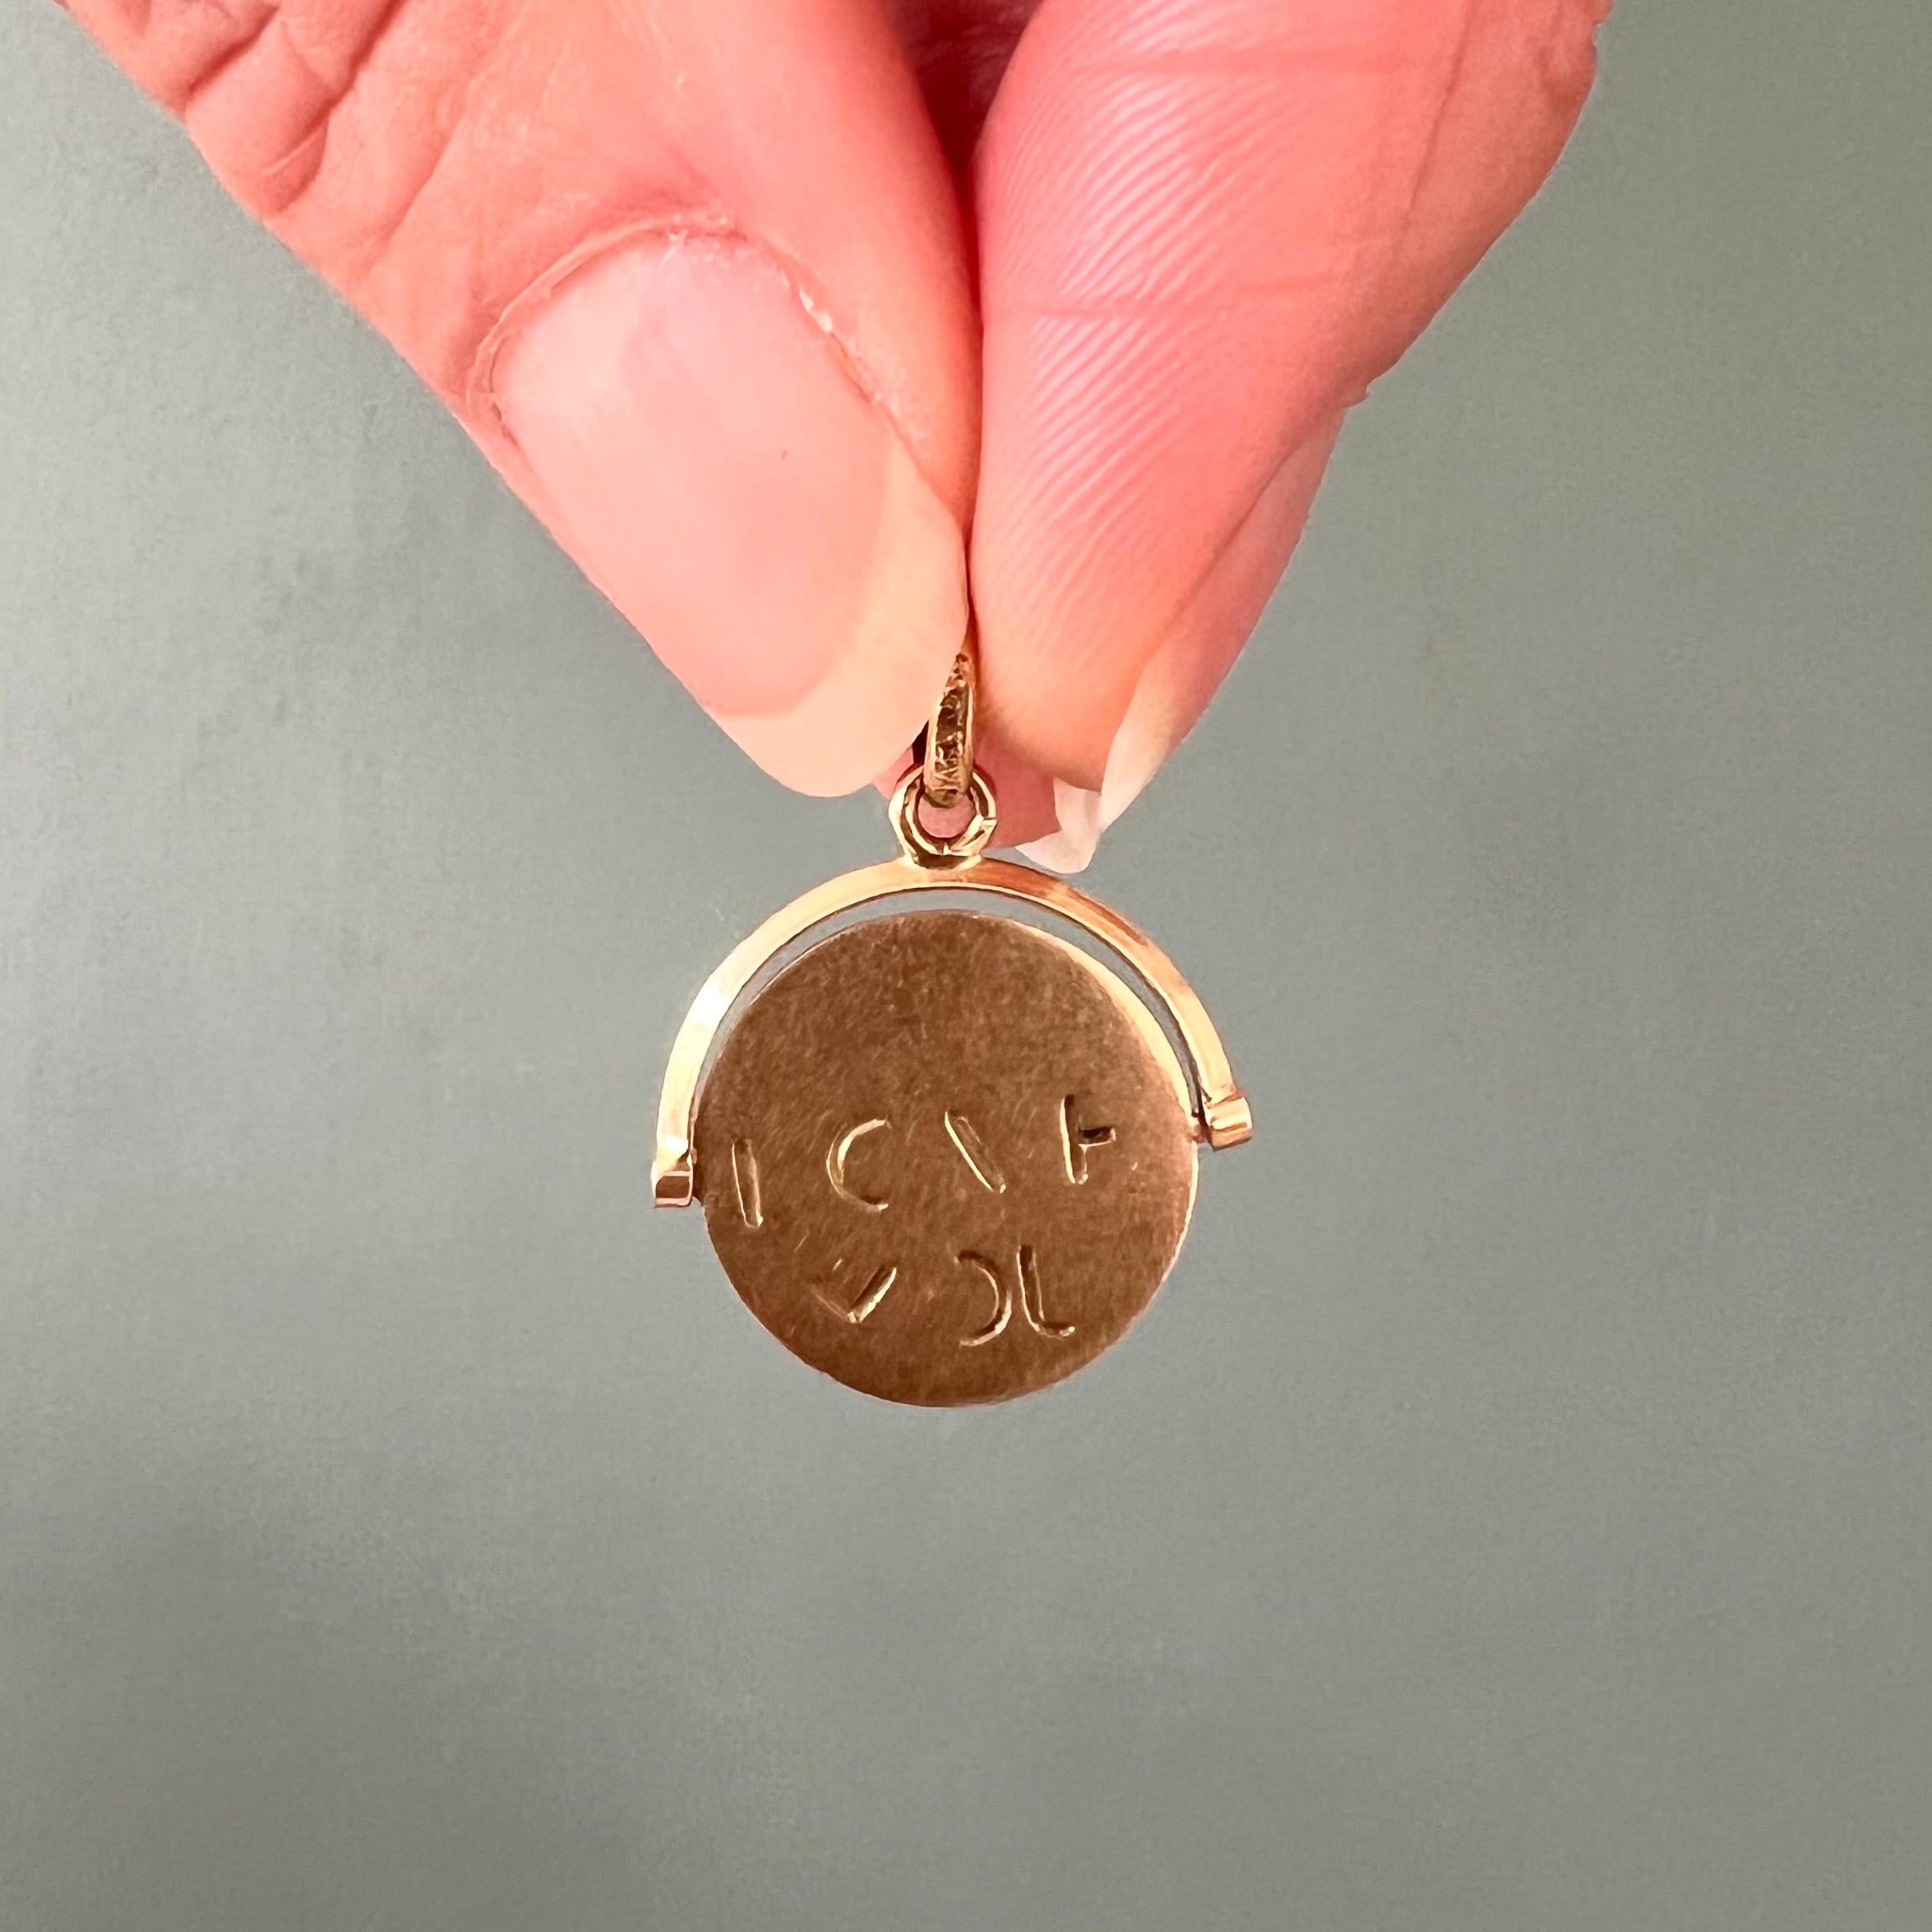 This is an 18 karat yellow gold vintage I Love You spinner charm. This cute love disc charm can spin - so you can see I love you emerge. What better way to make it known that you love someone! Give the disc a whirl and the words I Love You will